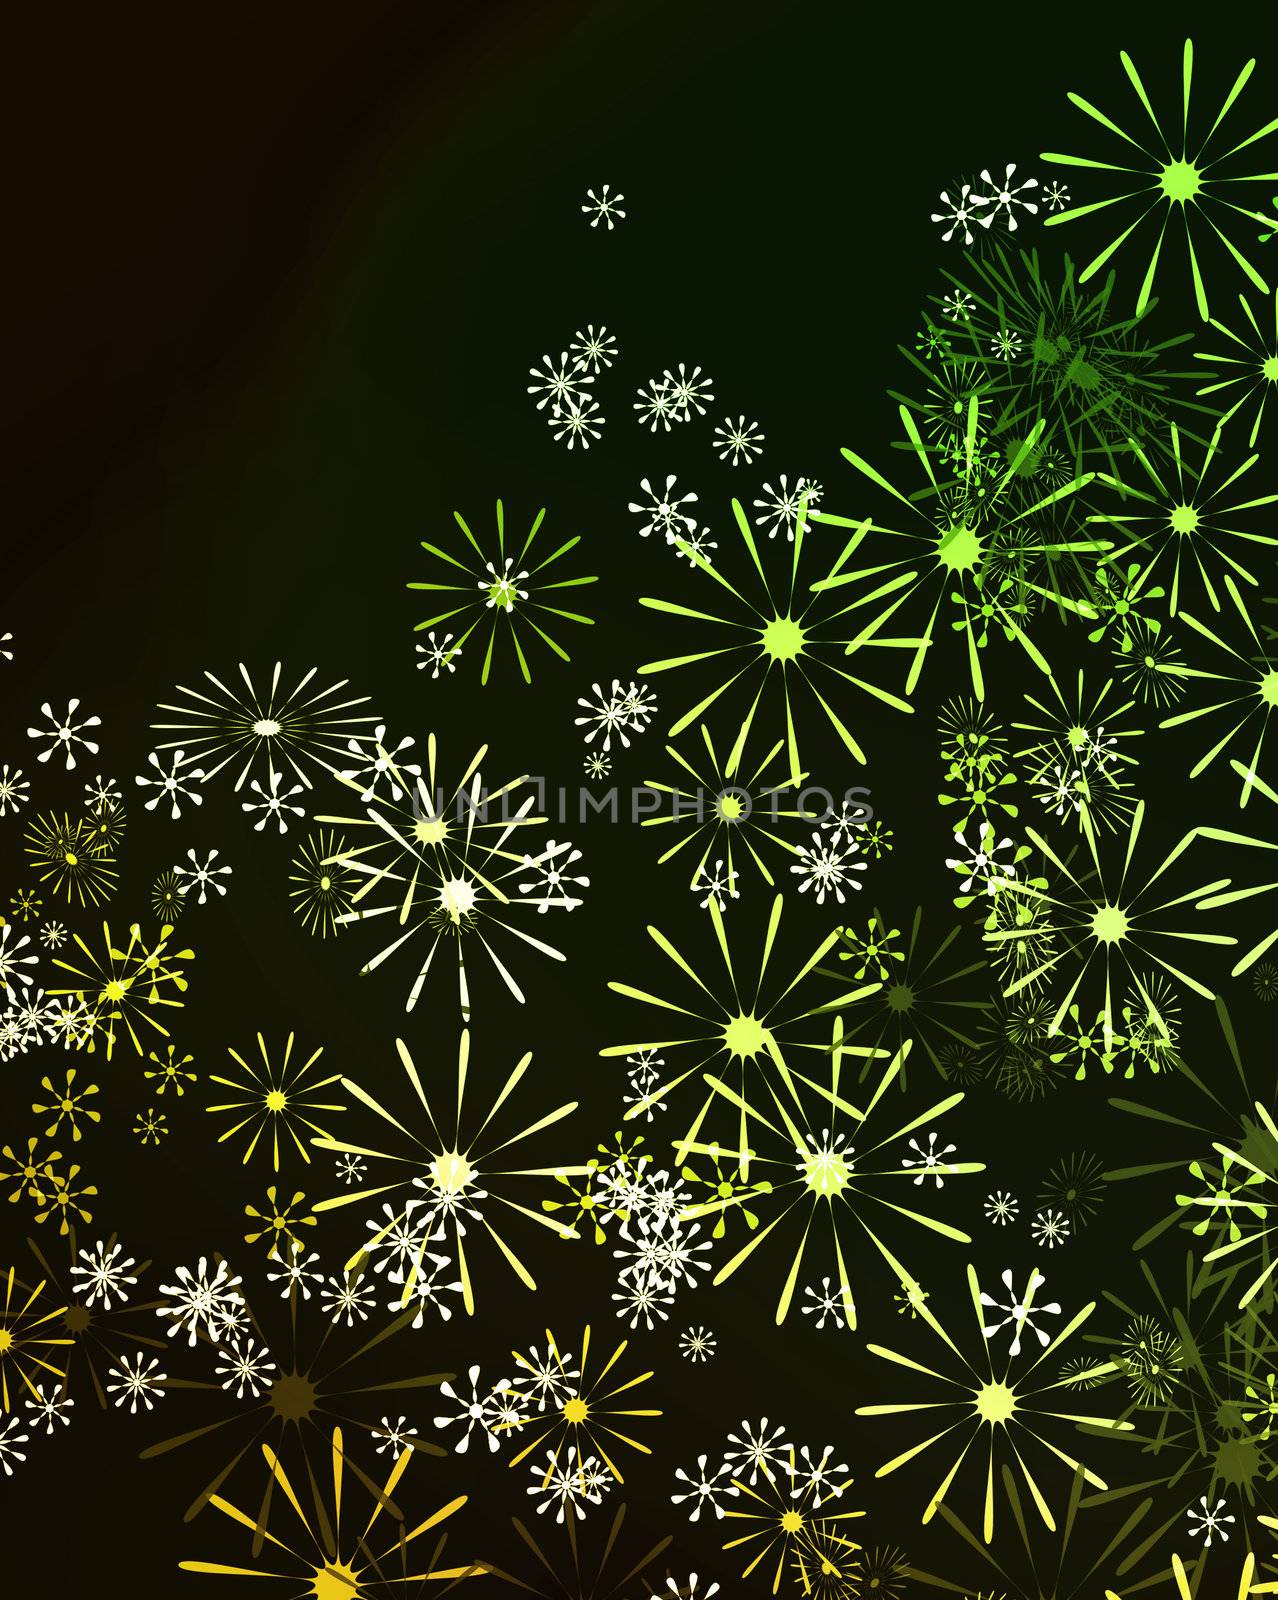 Abstract illustration depicting many pale green and cream flowers against black background.